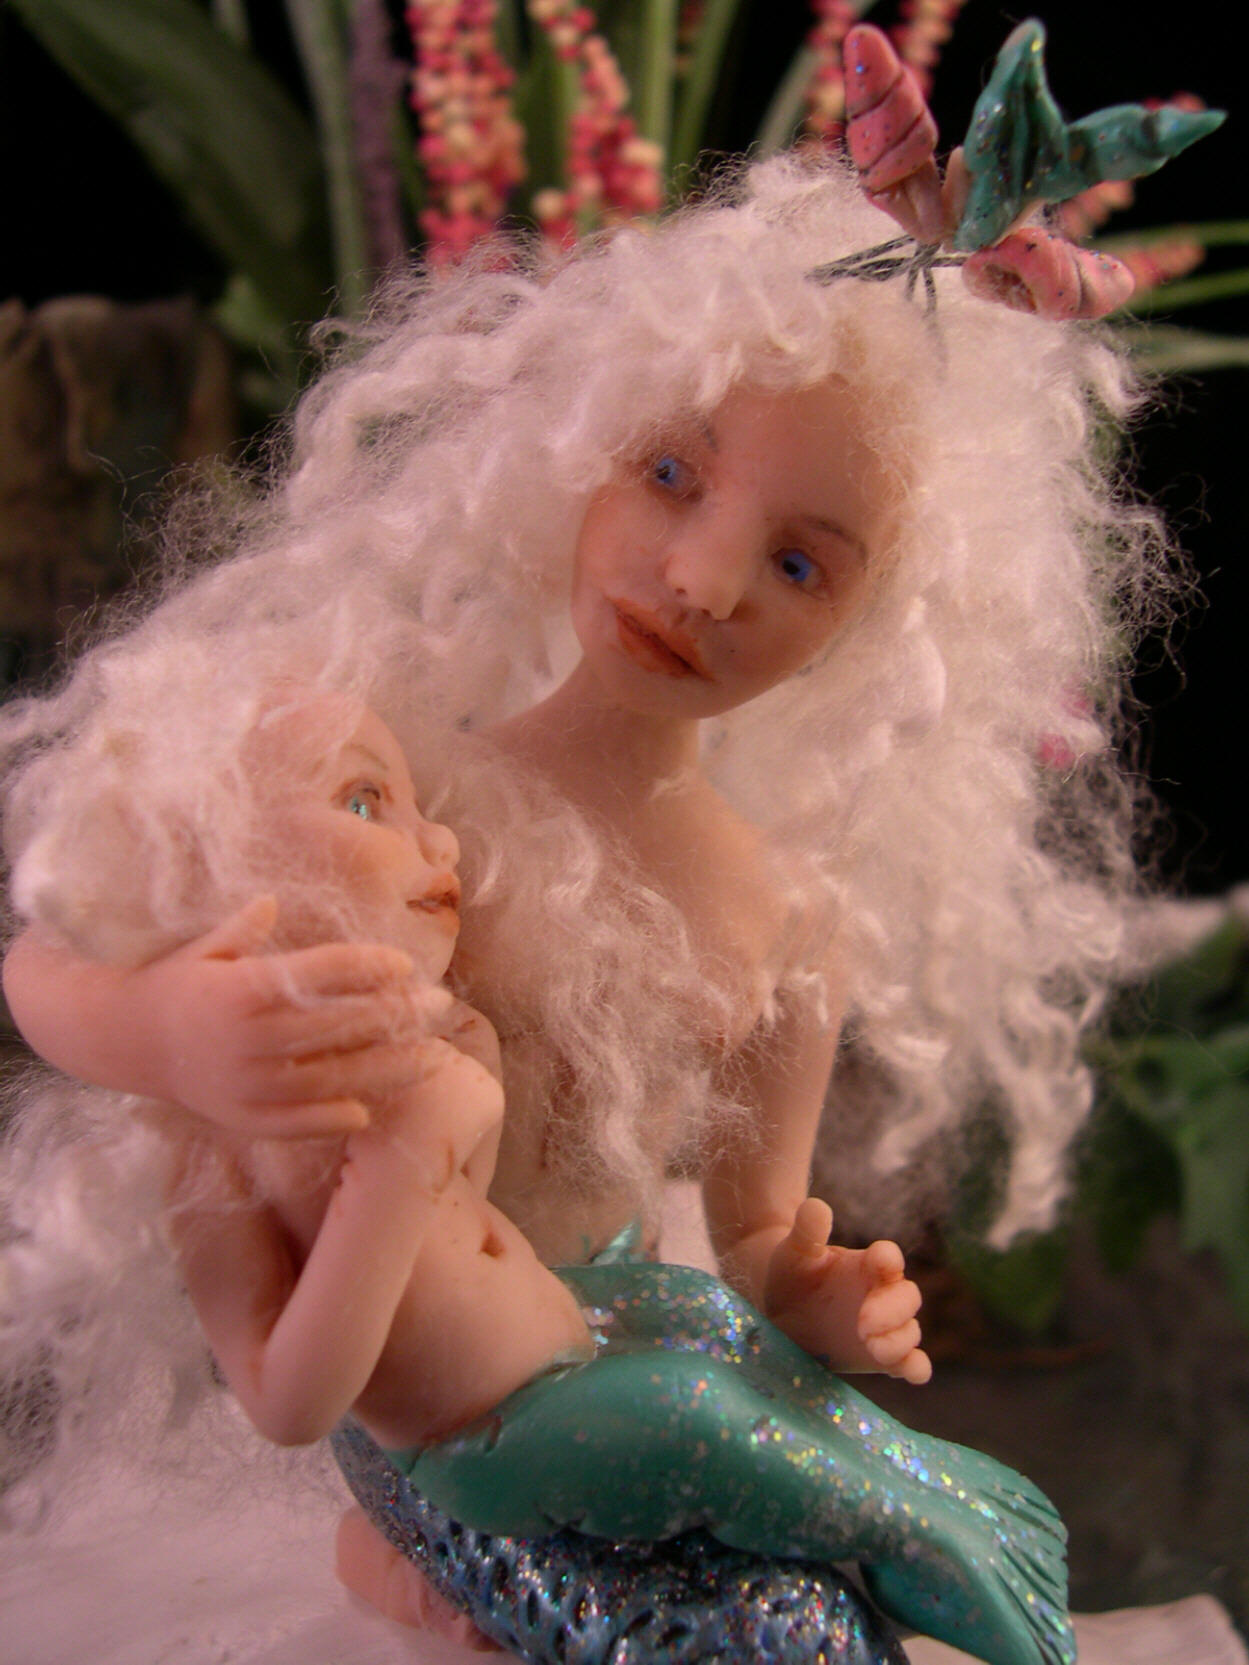 Mermaid with merbaby dolls made from polymer clay and push molds